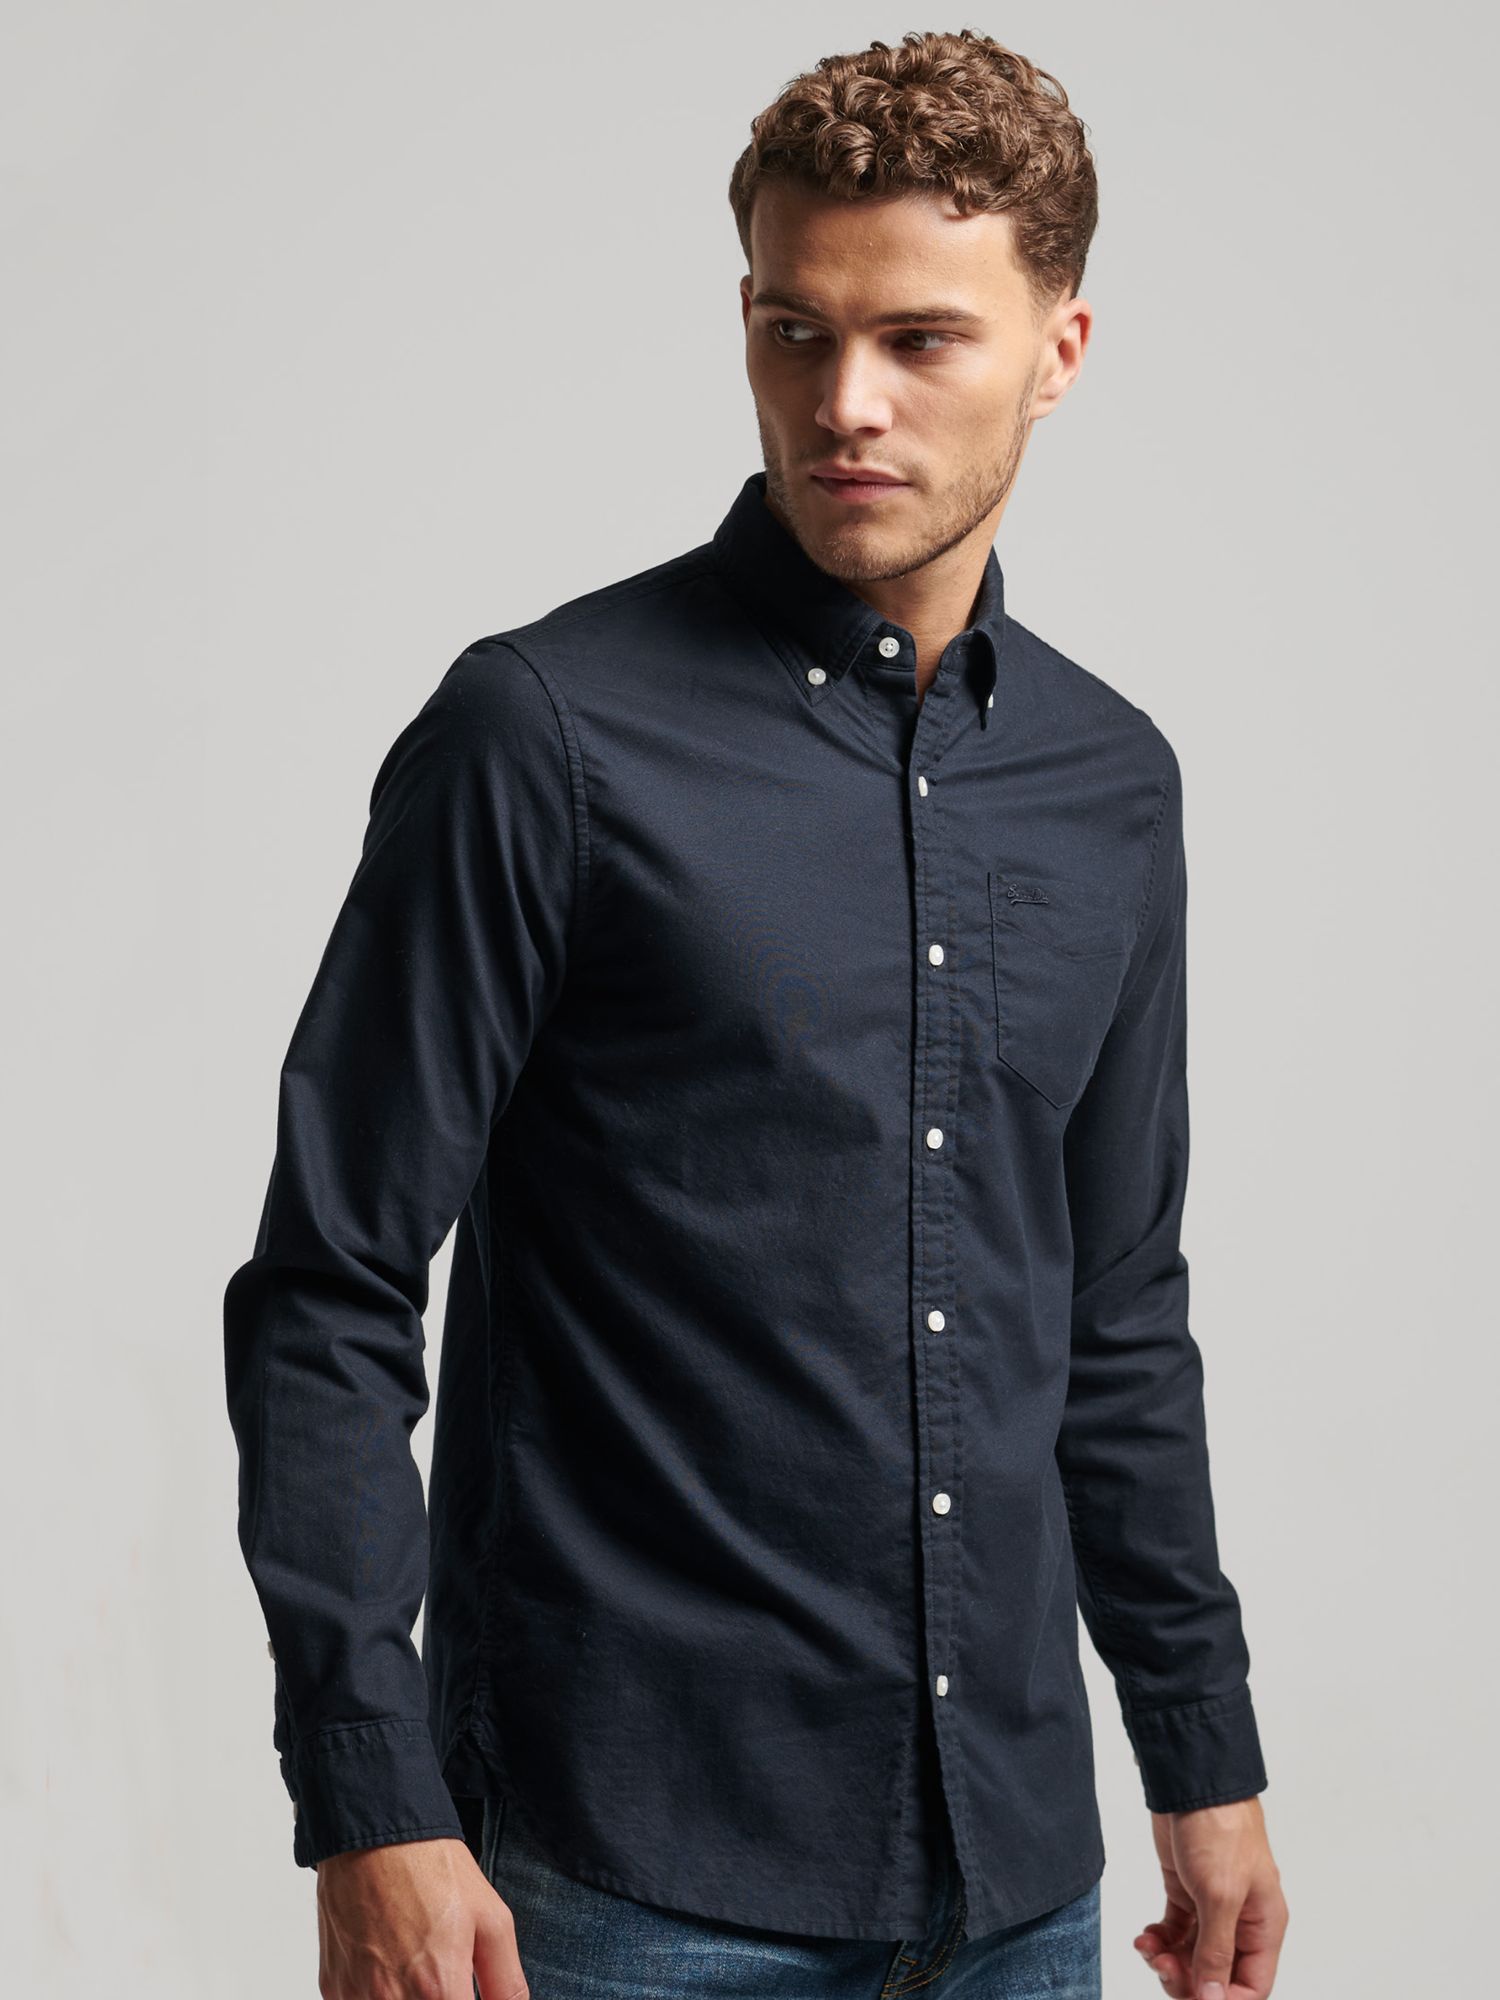 Superdry Washed Oxford Shirt, Eclipse Navy, S